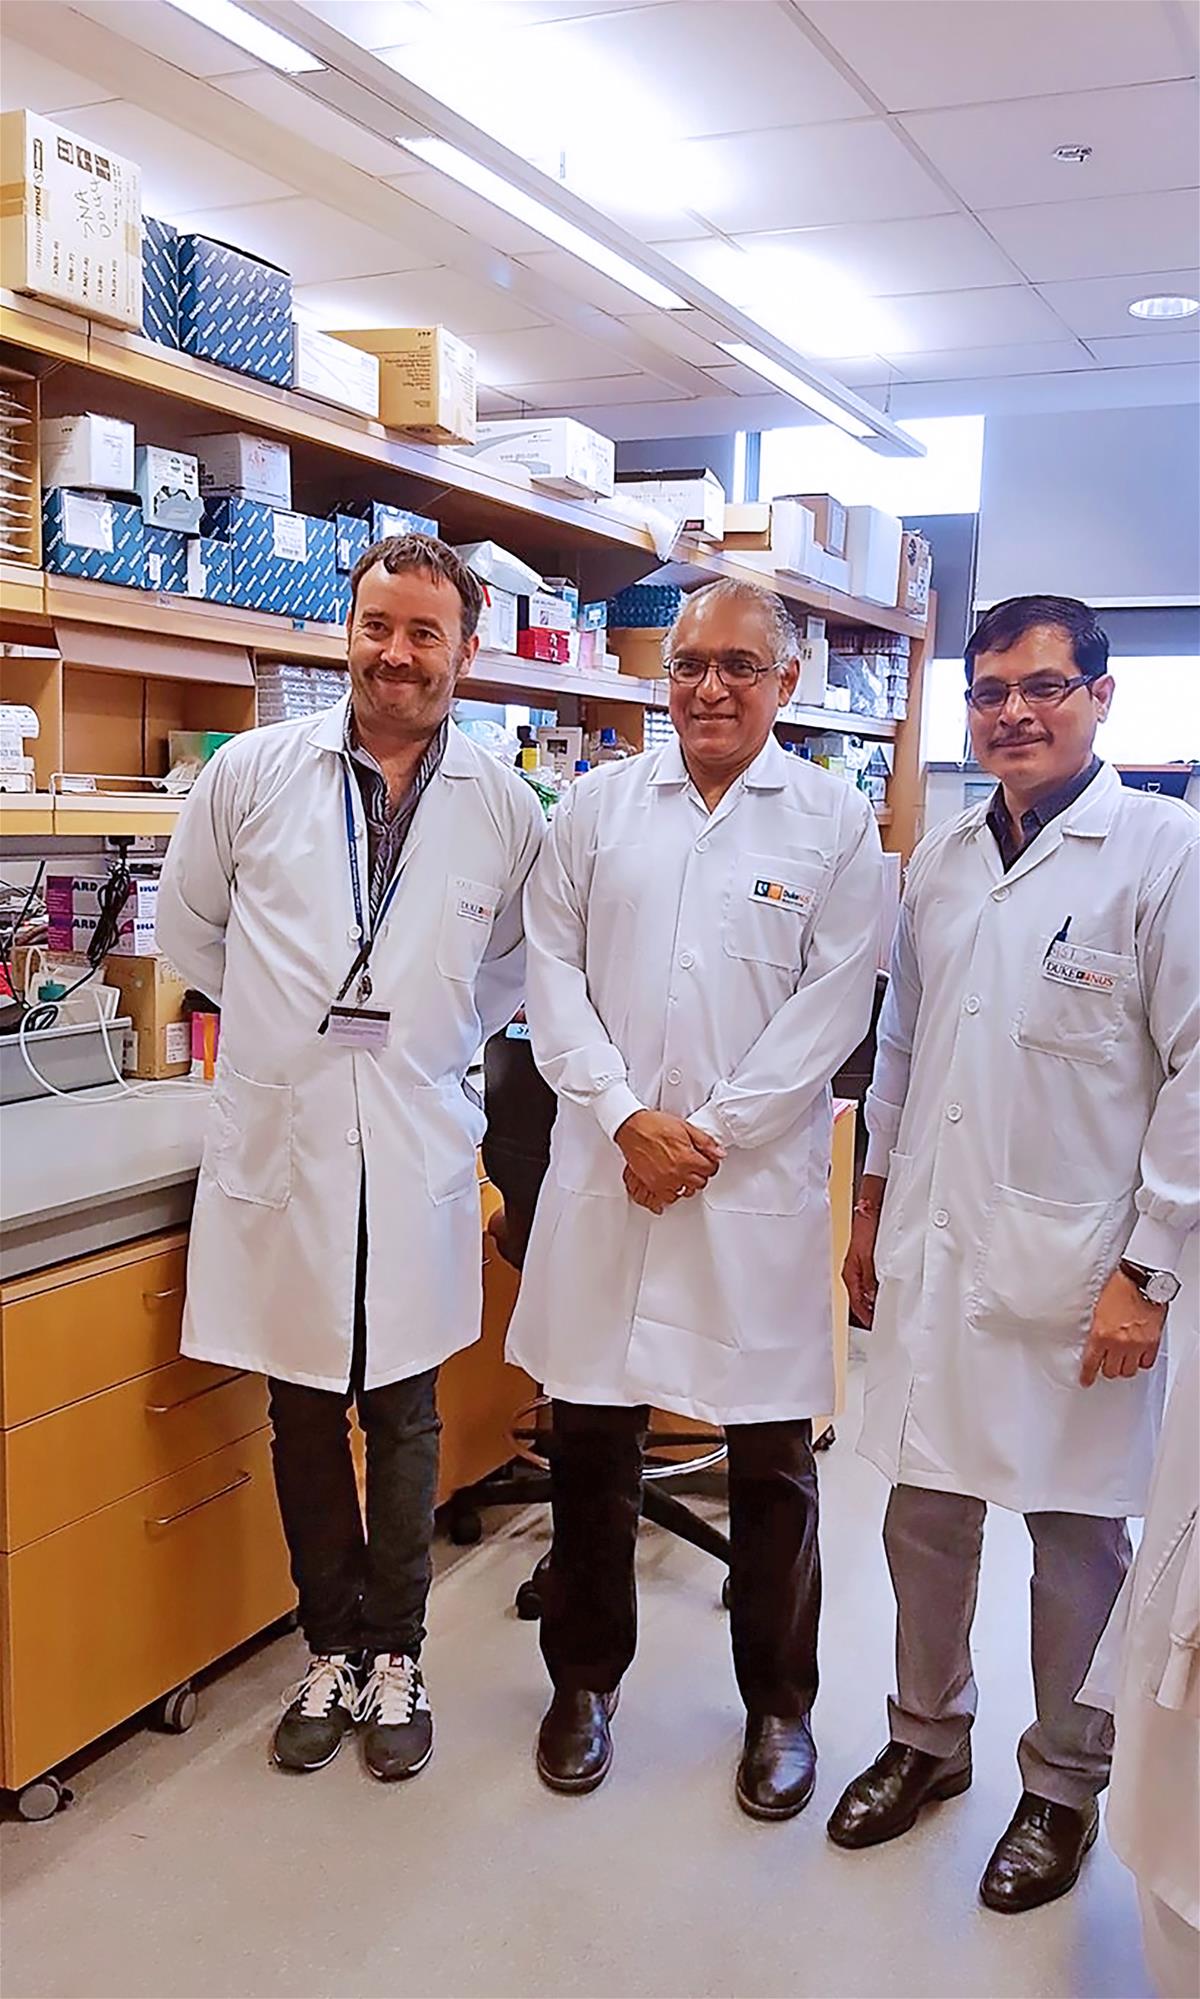 The research team, led by Professor Soman Abraham (centre), included co-first authors Andrea Mencarelli (left) and Pradeep Bist (right). // Credit: Courtesy of Soman Abraham